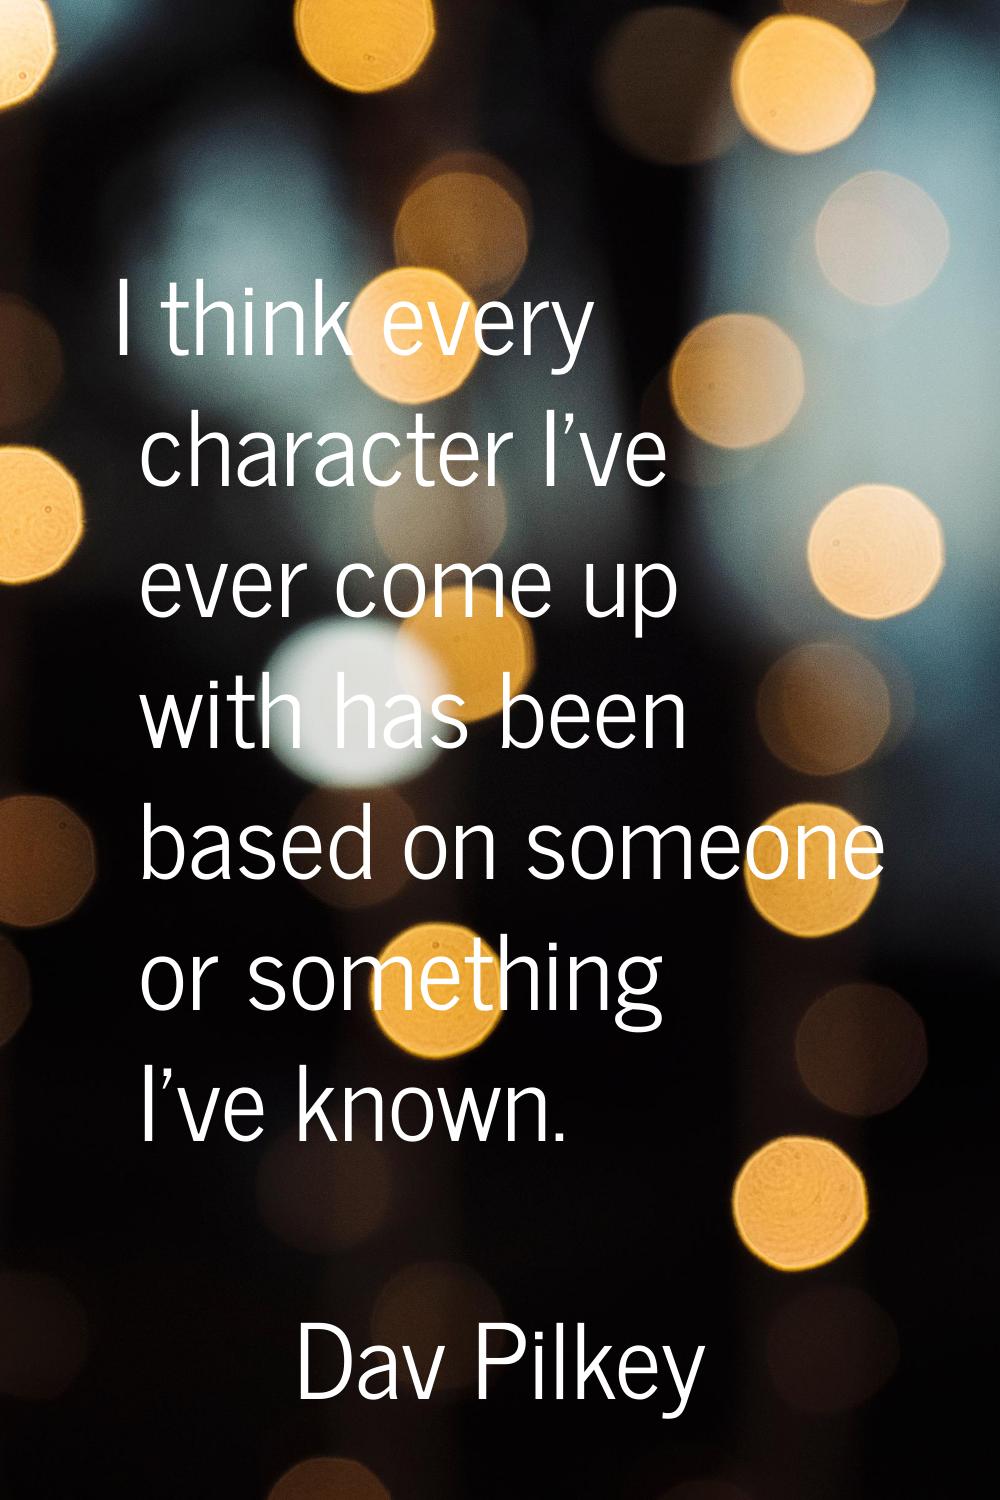 I think every character I've ever come up with has been based on someone or something I've known.